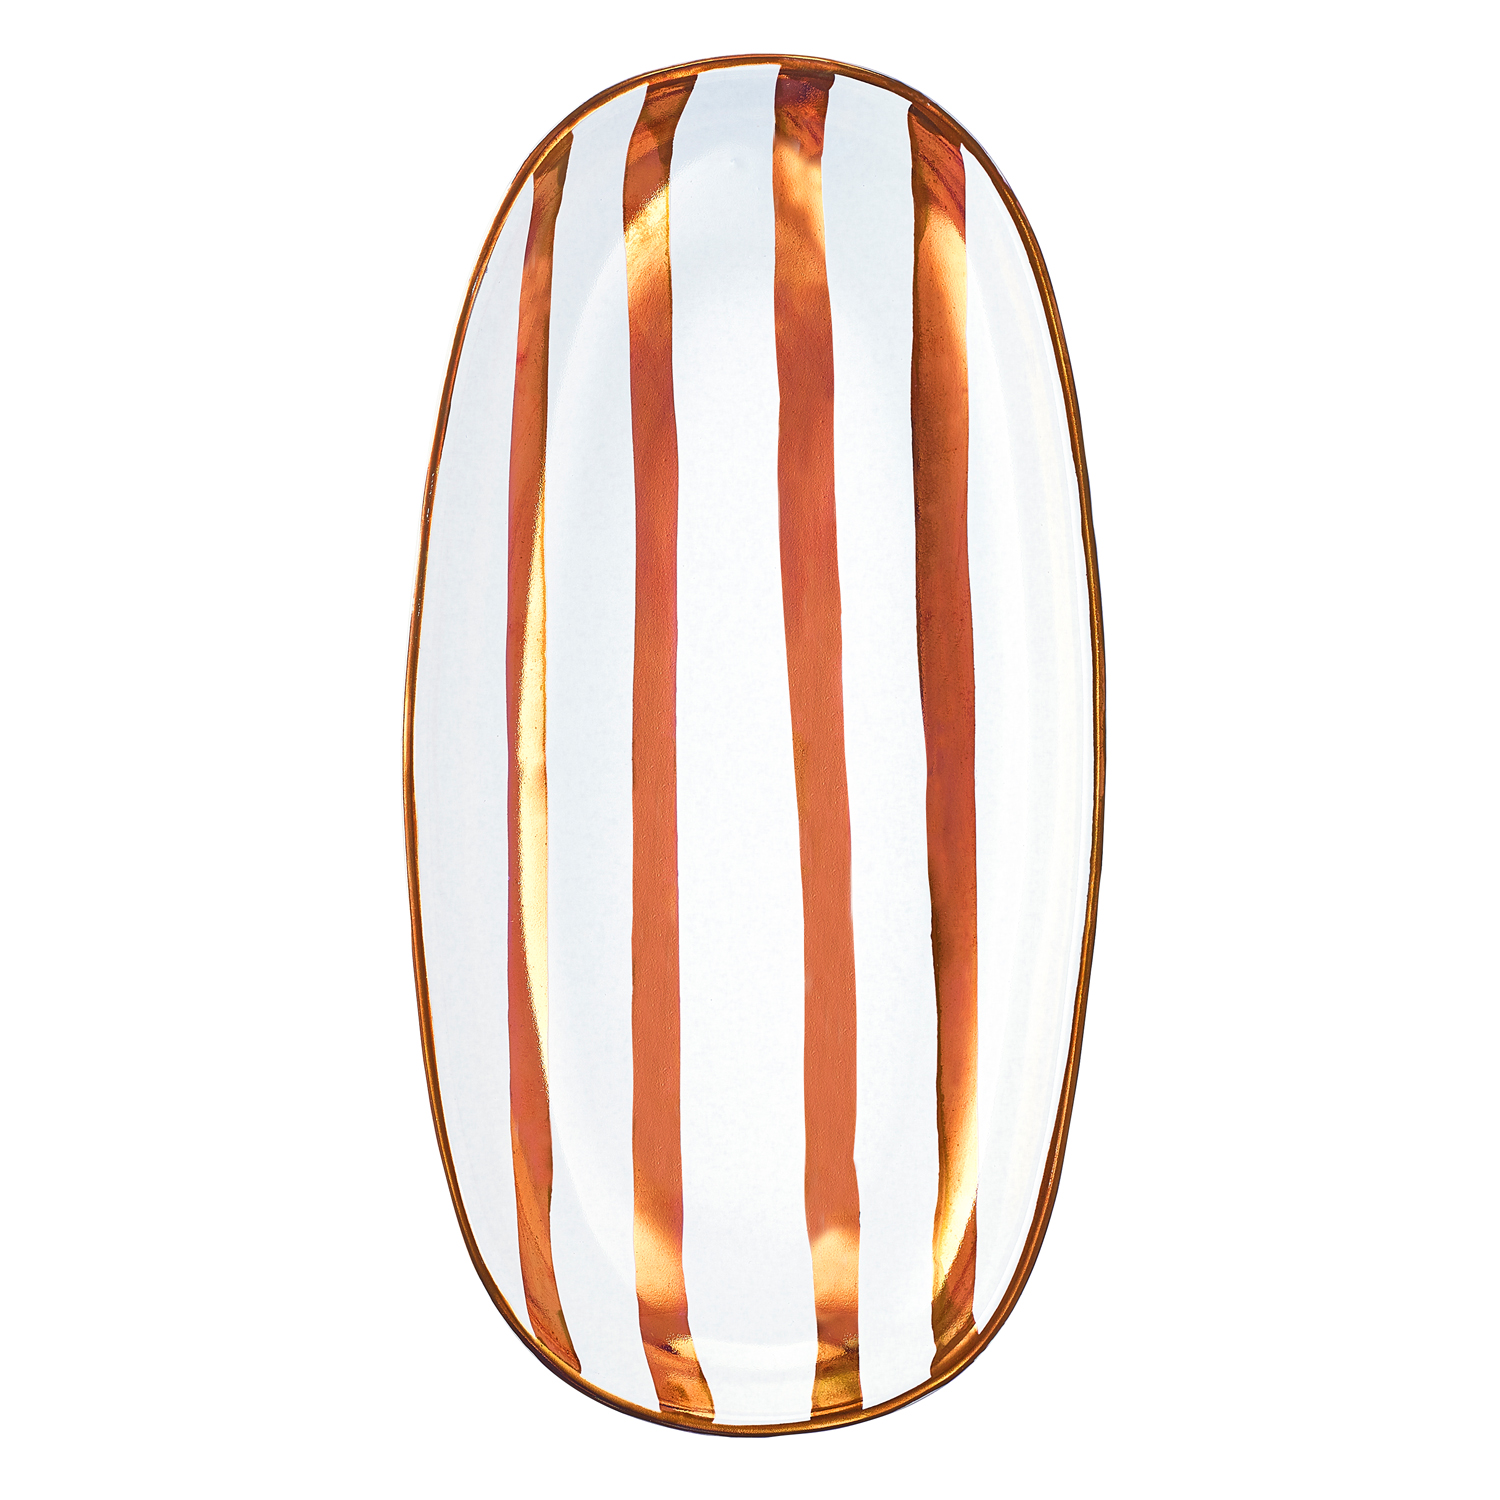 Rose Gold Striped 2-Piece Oval Stoneware Serving Platter - image 2 of 5